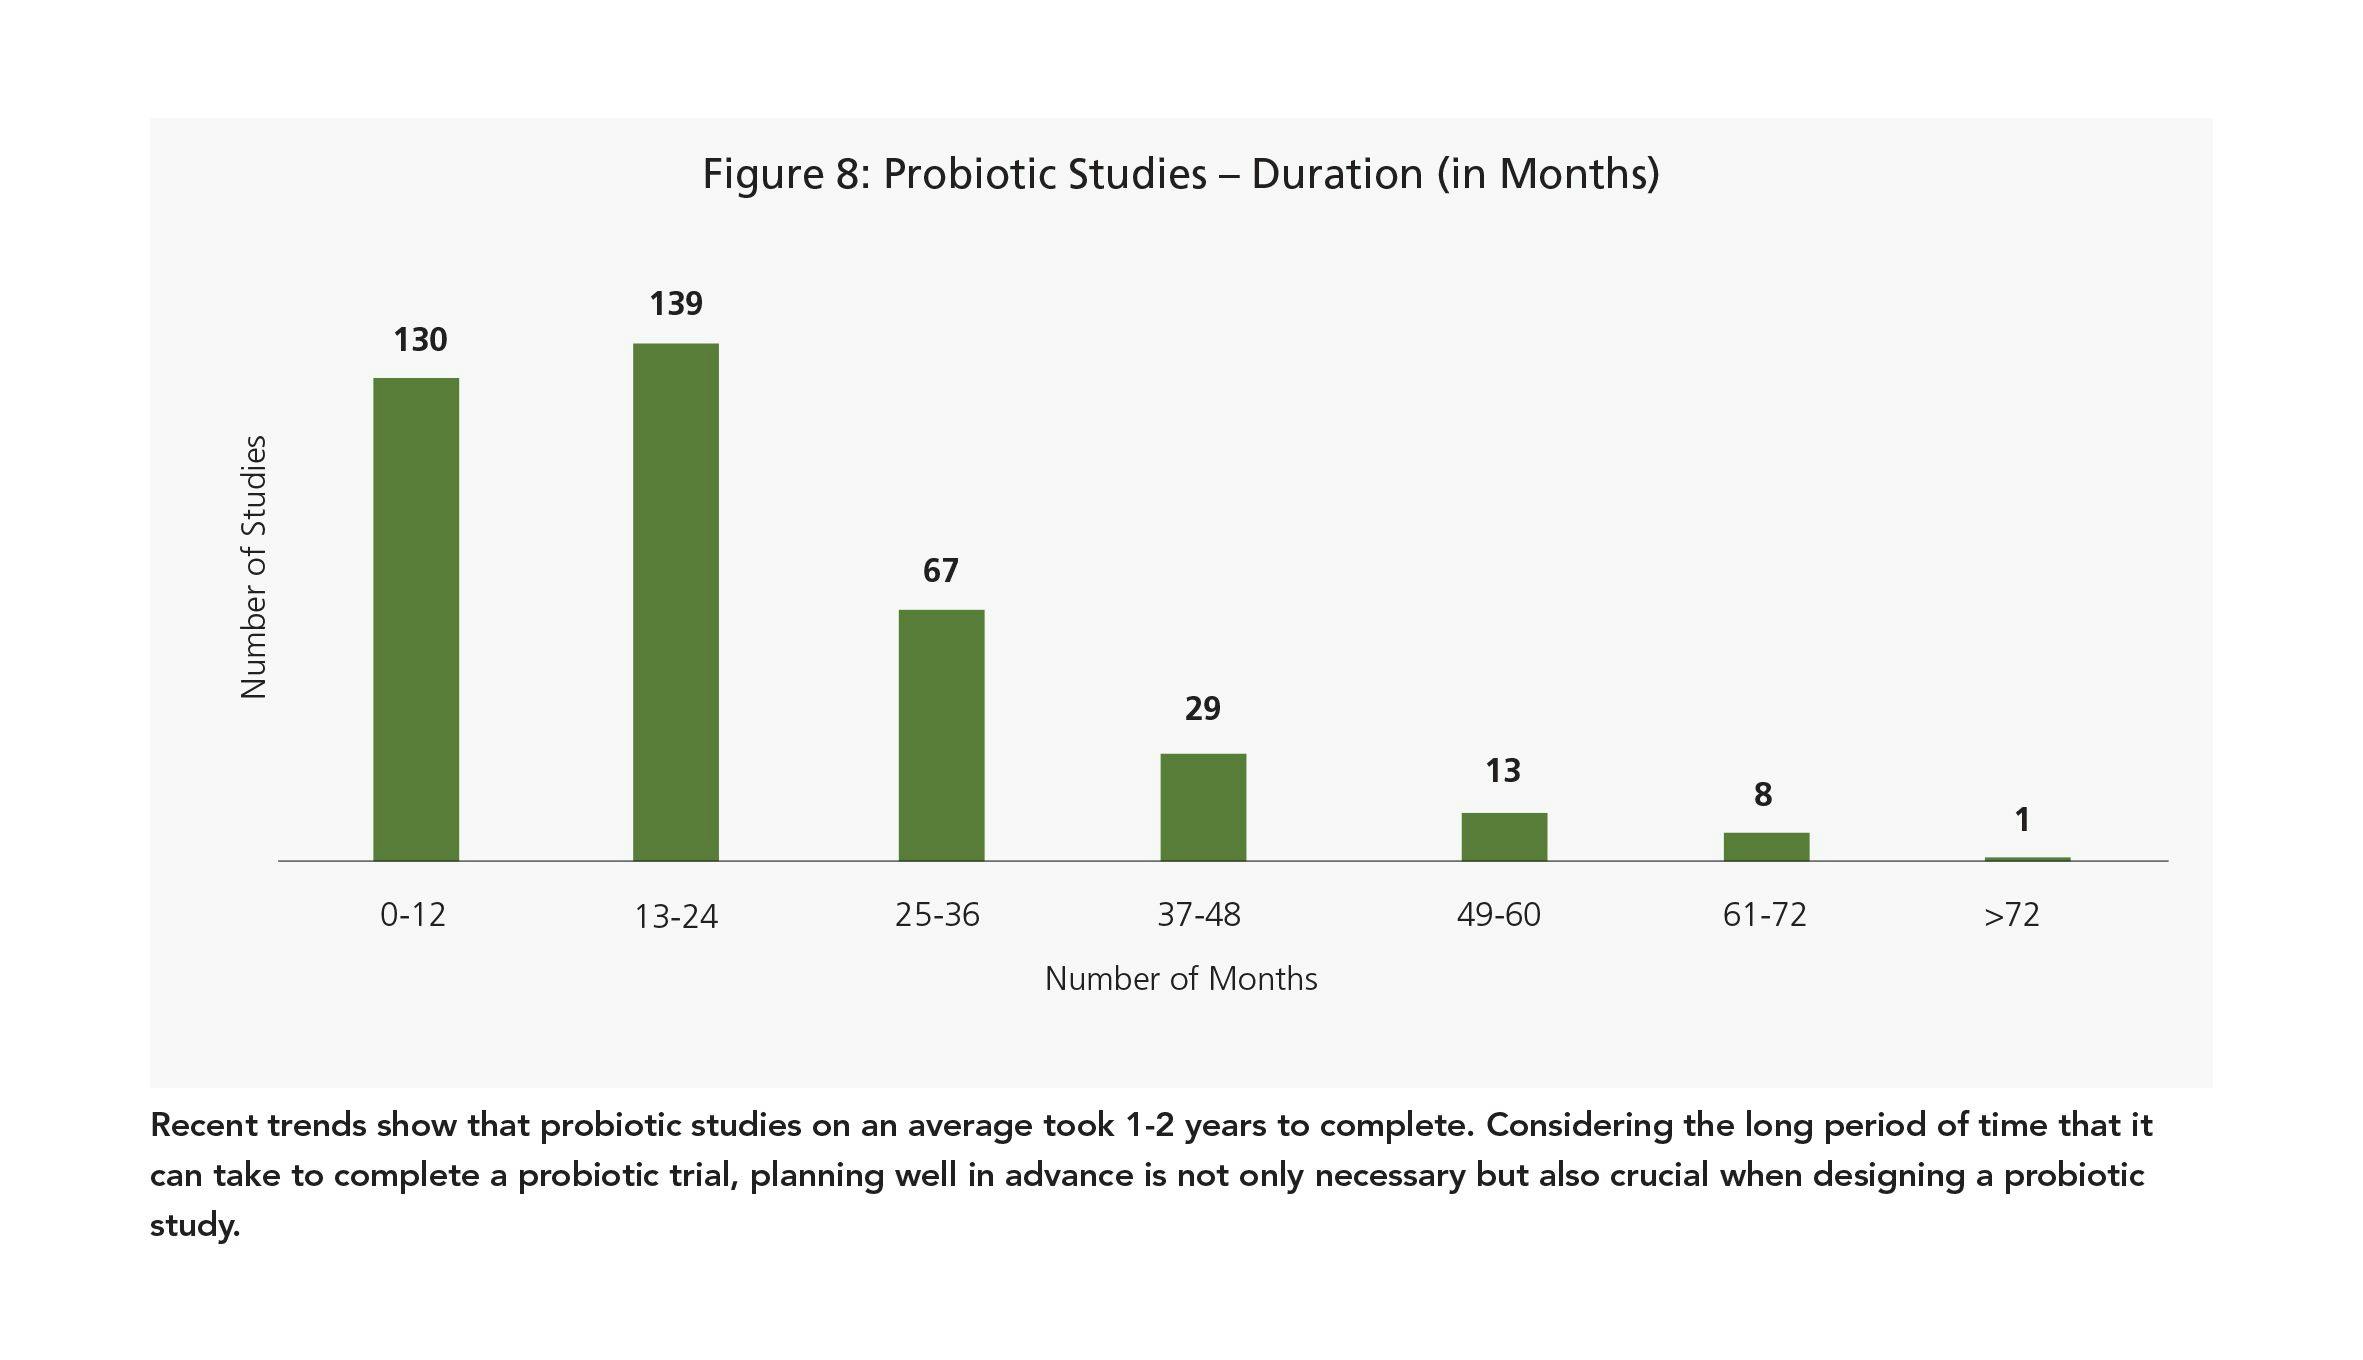 Recent trends show that probiotic studies on an average took 1-2 years to complete. Considering the long period of time that it can take to complete a probiotic trial, planning well in advance is not only necessary but also crucial when designing a probiotic study.